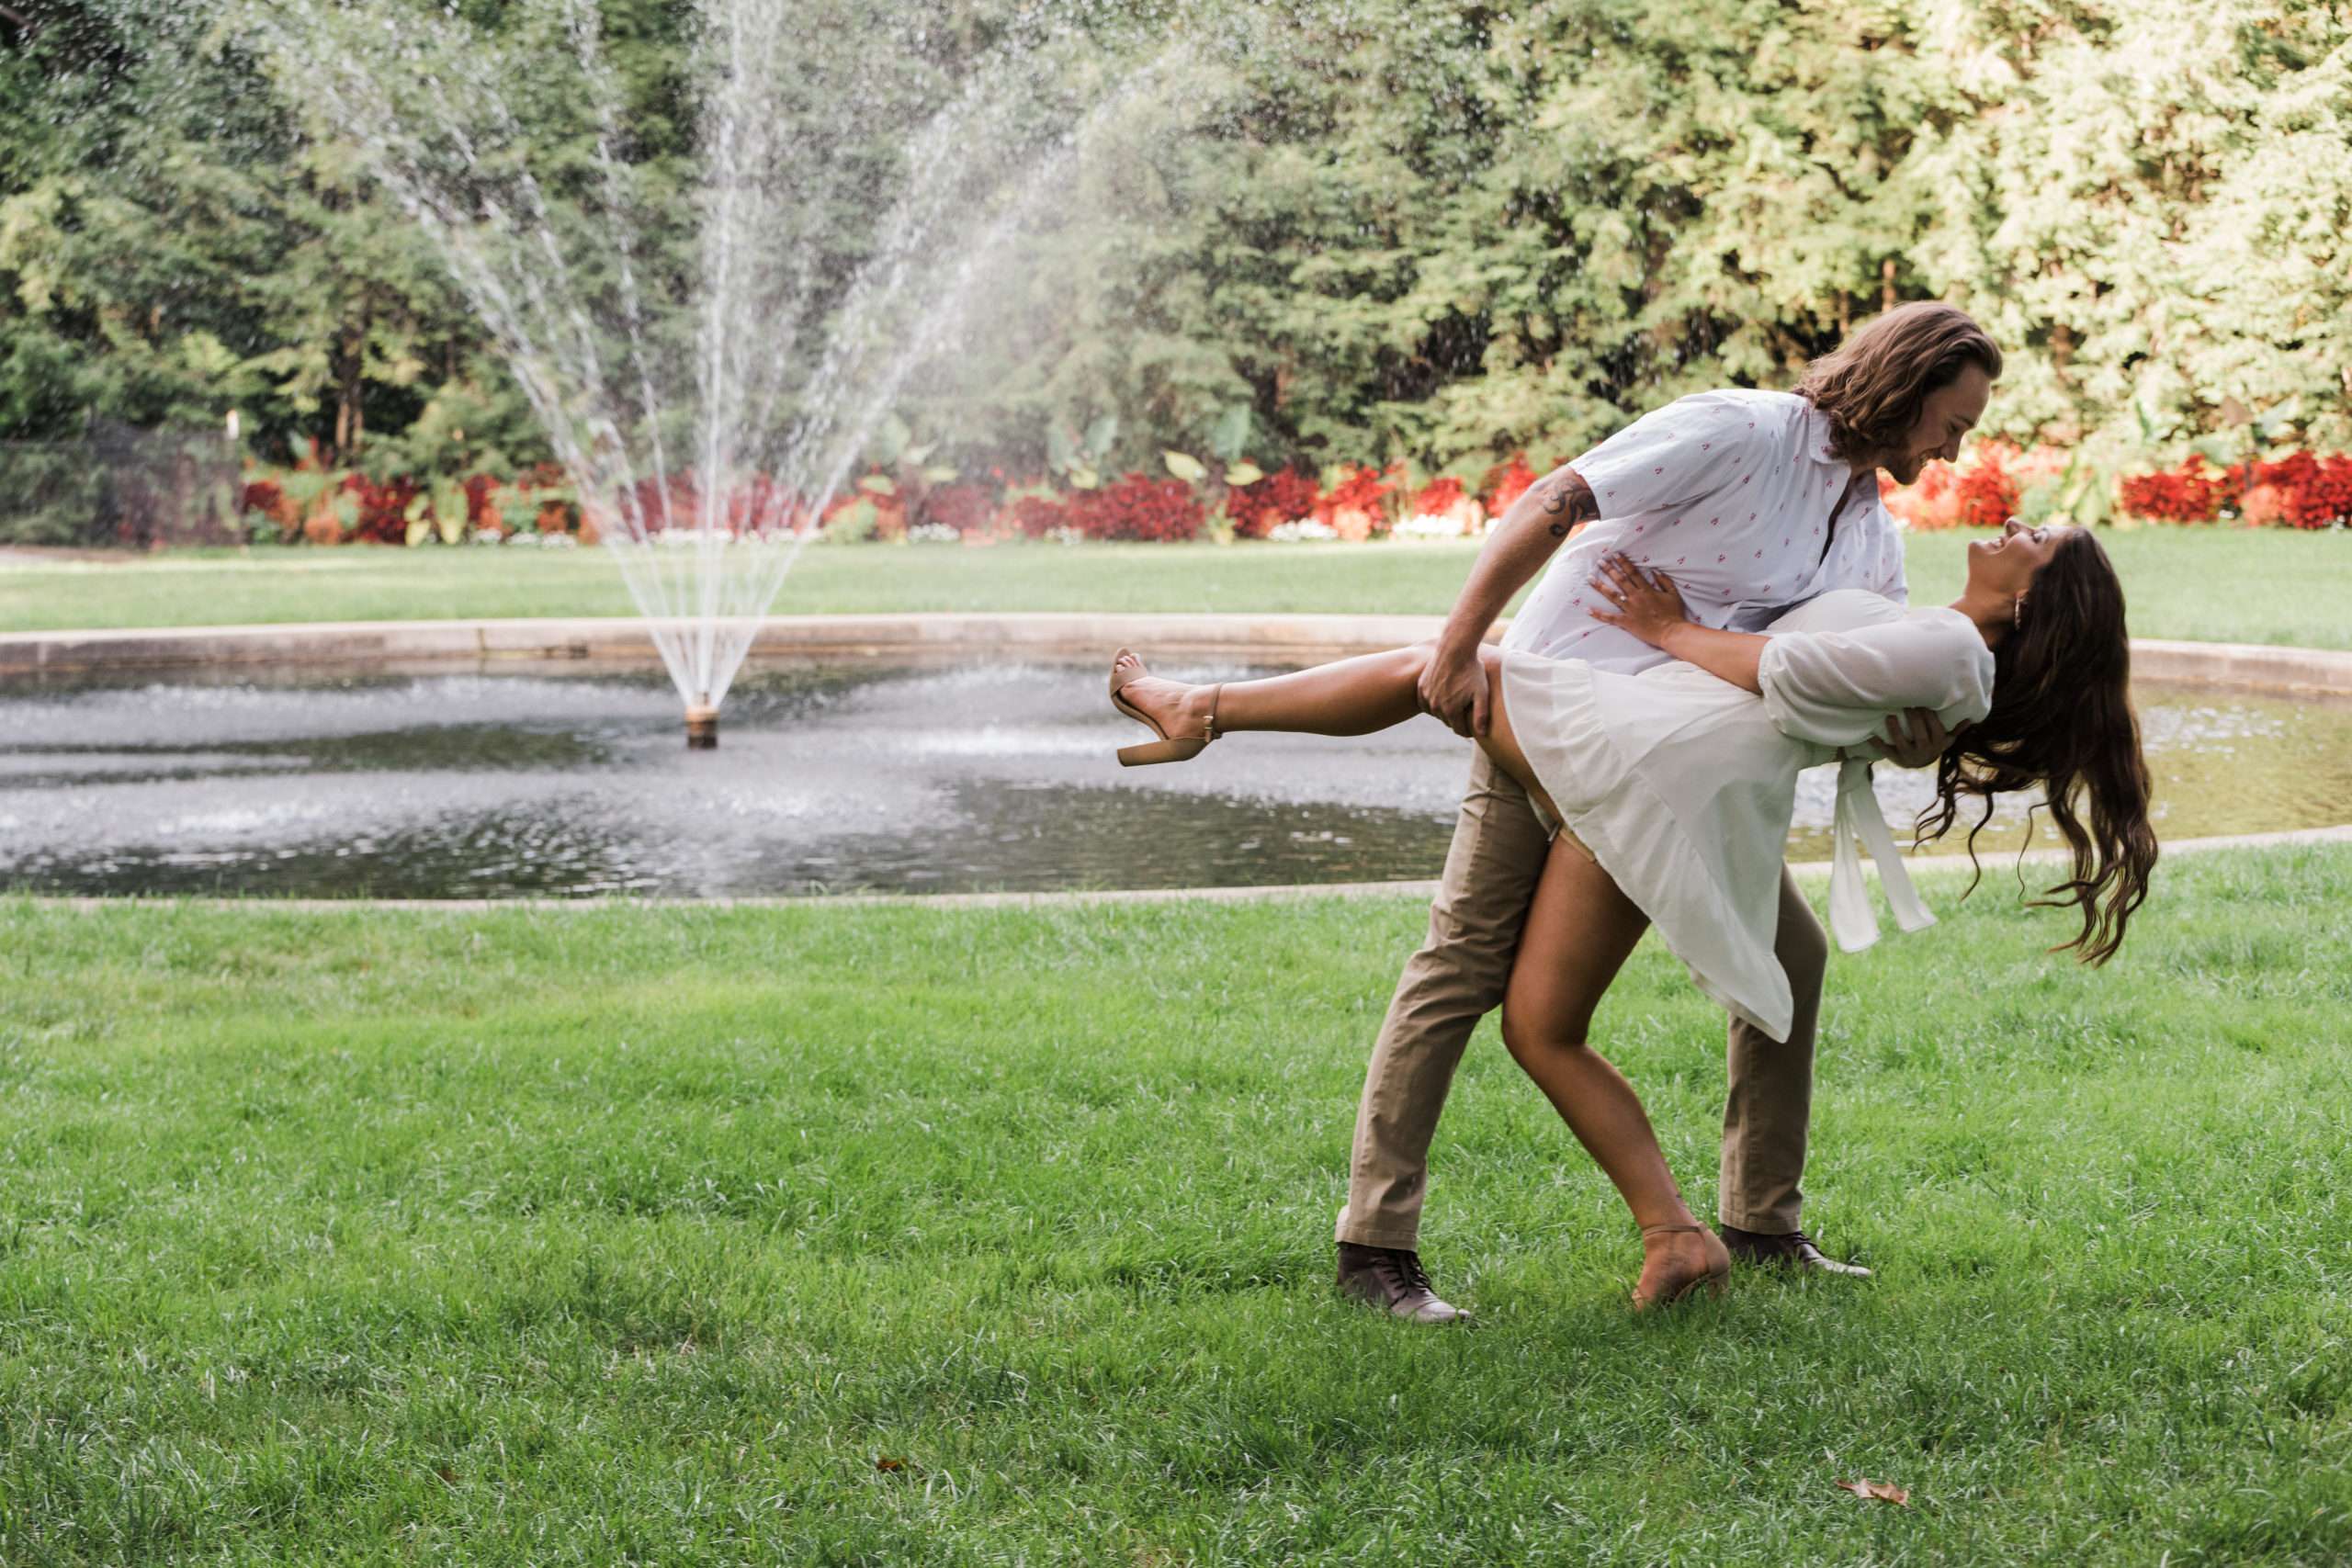 The dip pose captured during an Indianapolis engagement session.